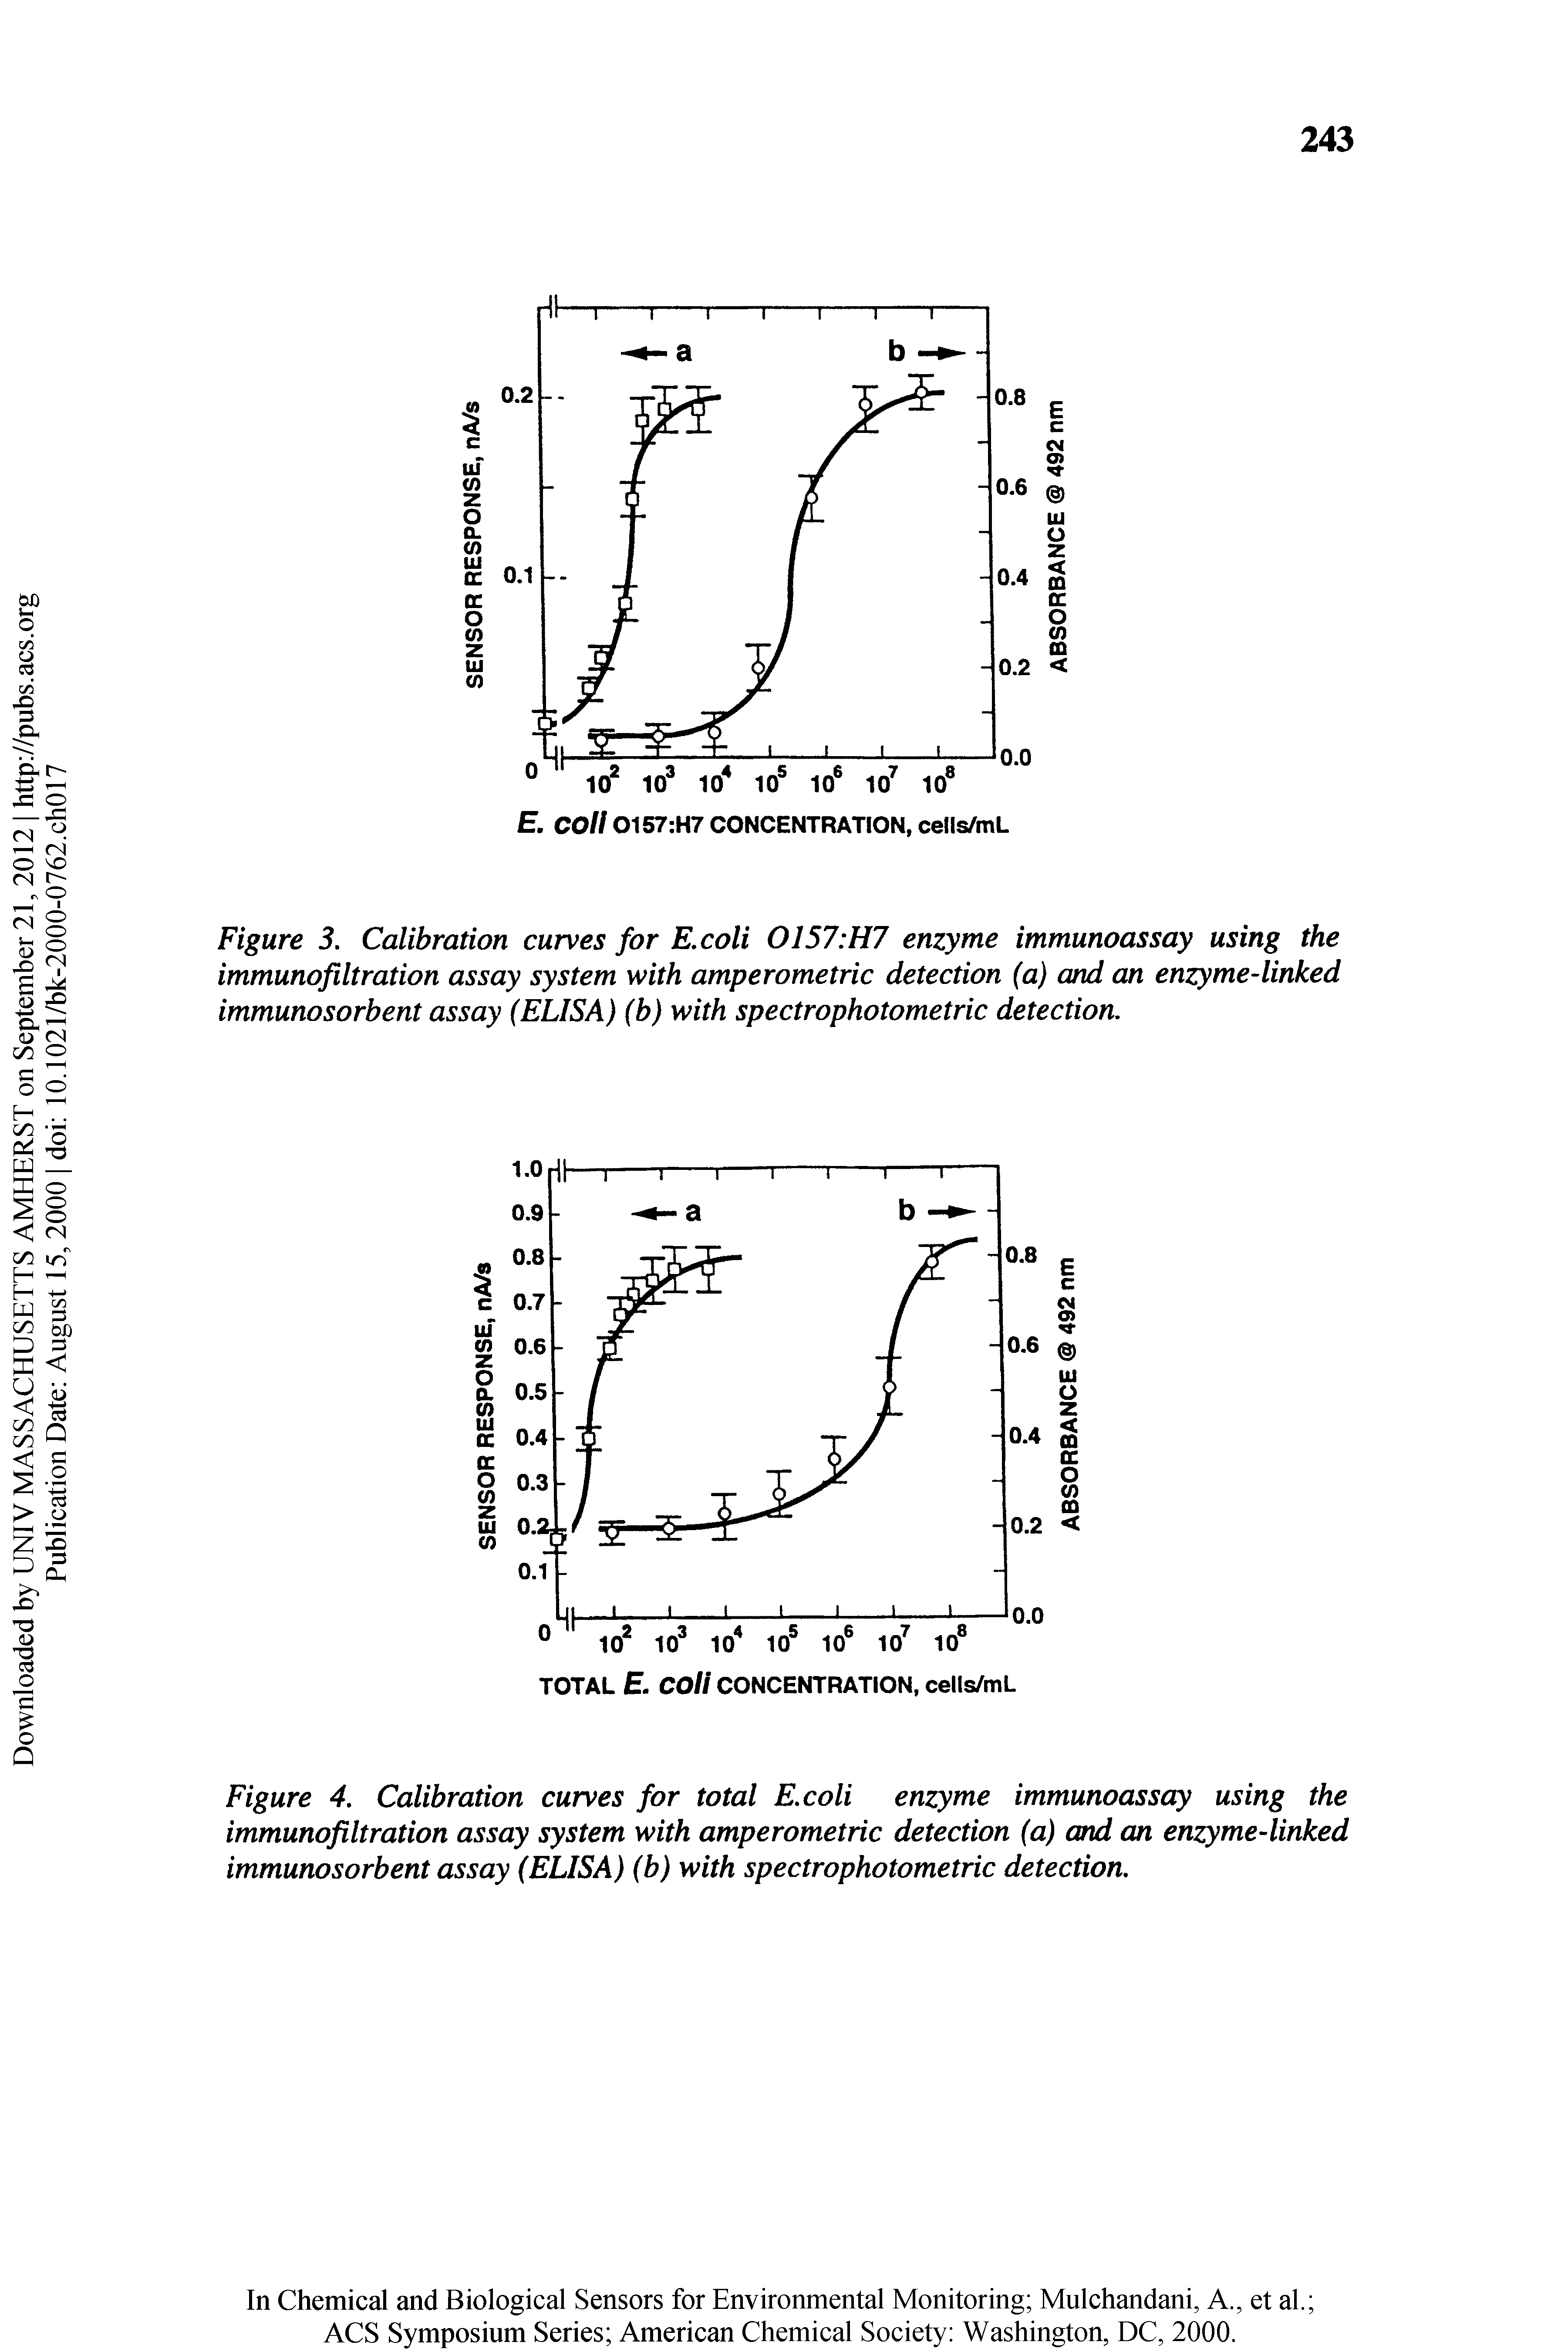 Figure 3. Calibration curves for E.coli 0157 H7 enzyme immunoassay using the immunofiltration assay system with amperometric detection (a) and an enzyme-linked immunosorbent assay (ELISA) (b) with spectrophotometric detection.